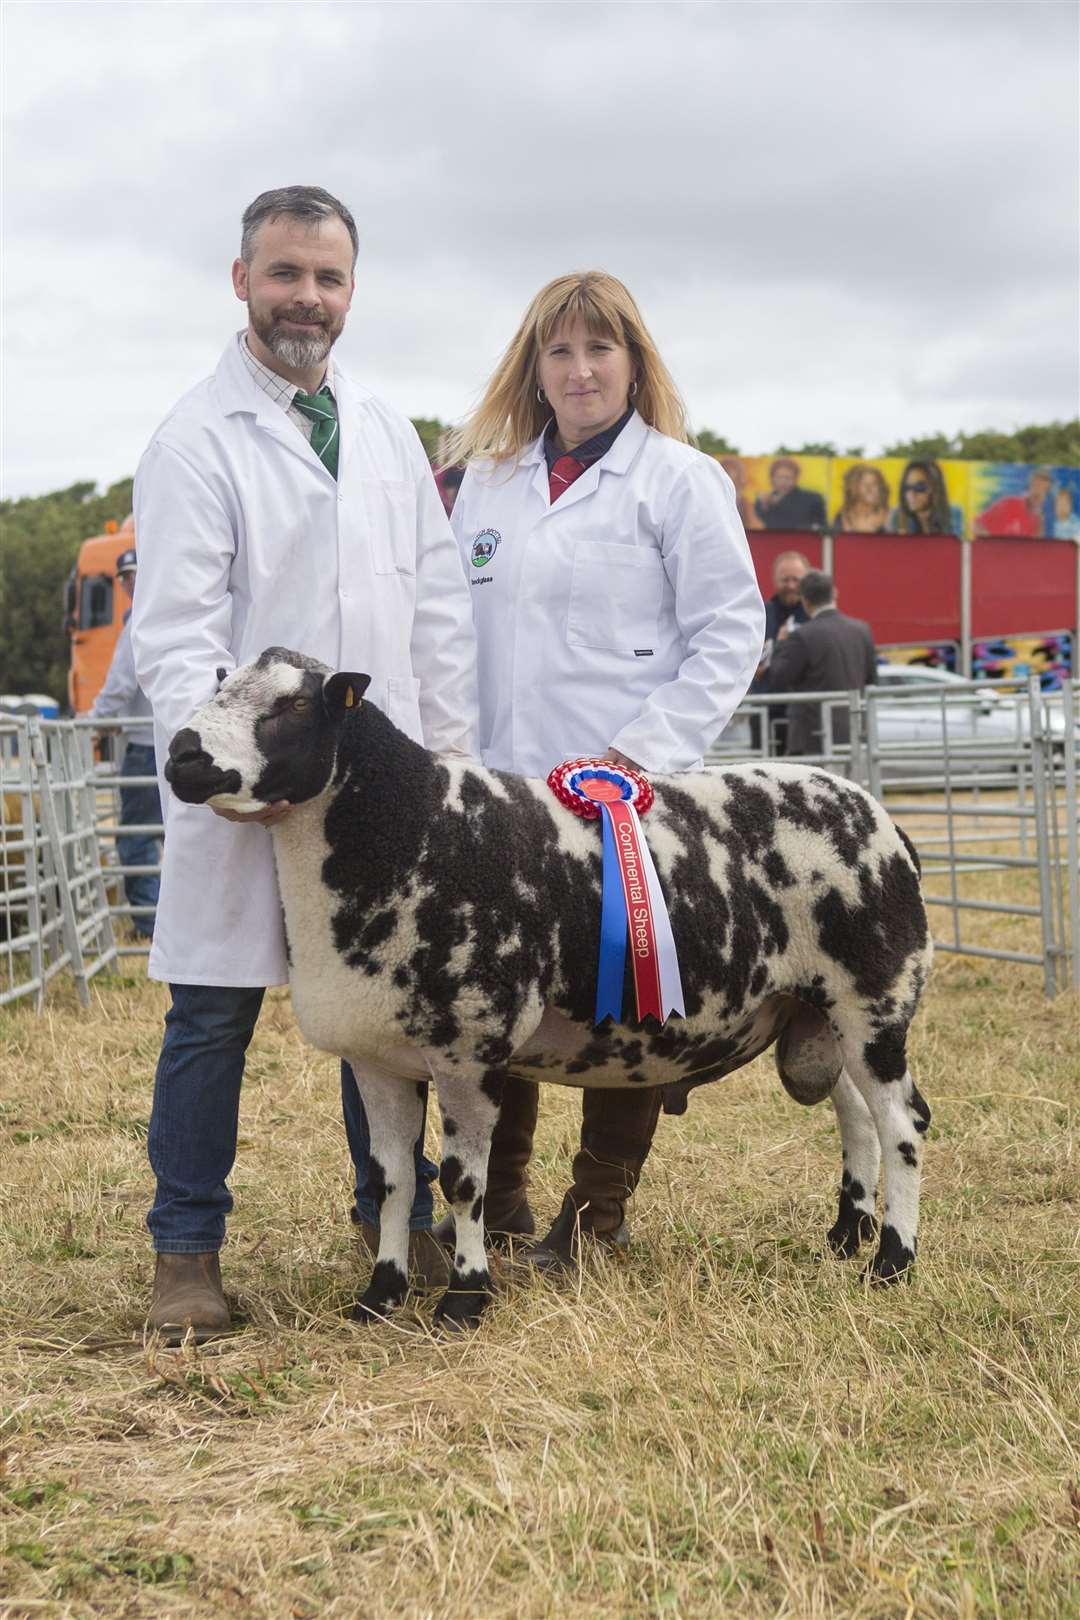 James and Anne Budge, Knockglass Farm, with their continental champion, Knockglass Dutch Courage, a two-year-old Dutch Spotted tup by Merryboro Cracker. Picture: Robert MacDonald / Northern Studios